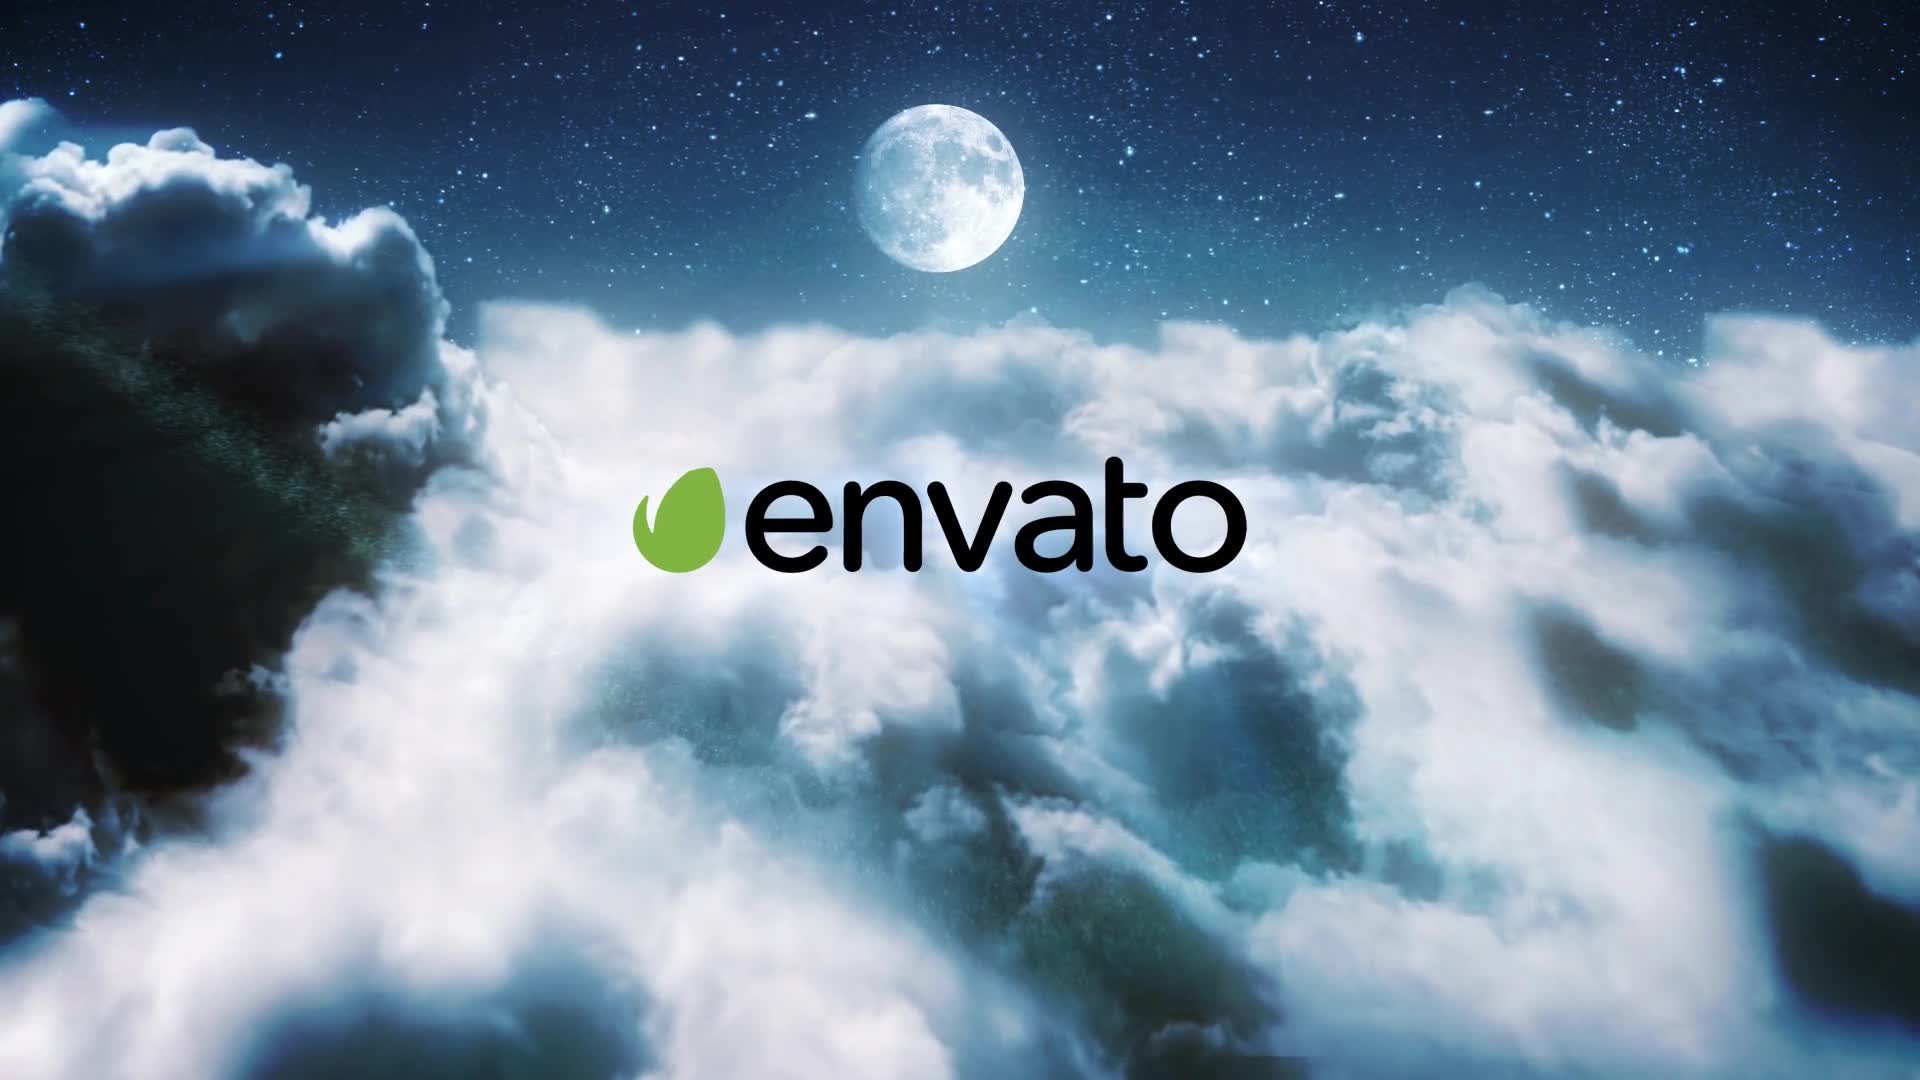 Clouds in a Night Sky - Download Videohive 9767396